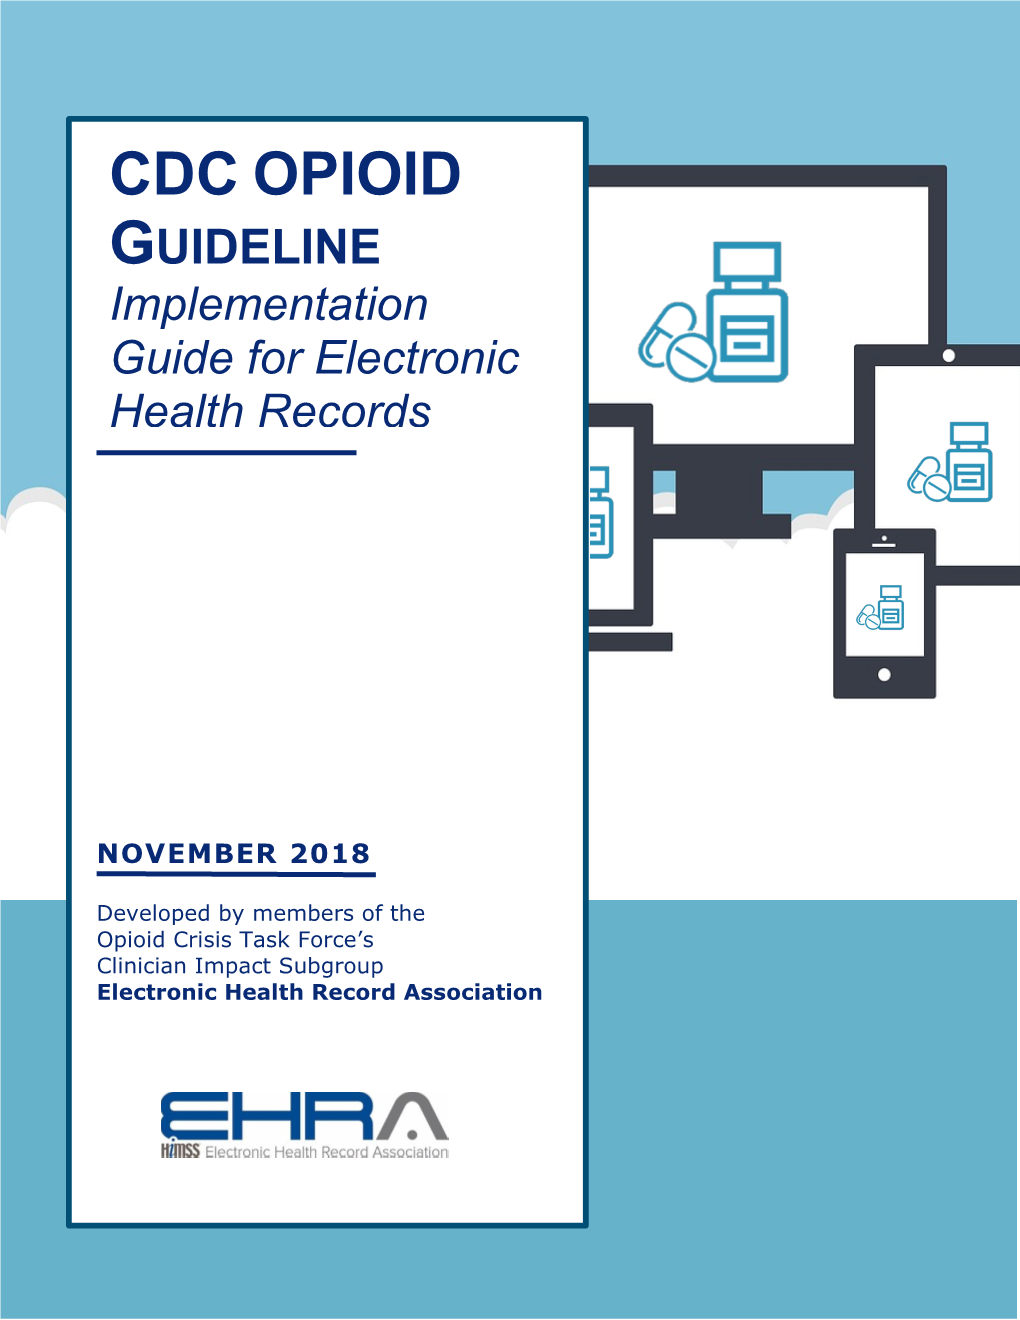 CDC OPIOID GUIDELINE Implementation Guide for Electronic